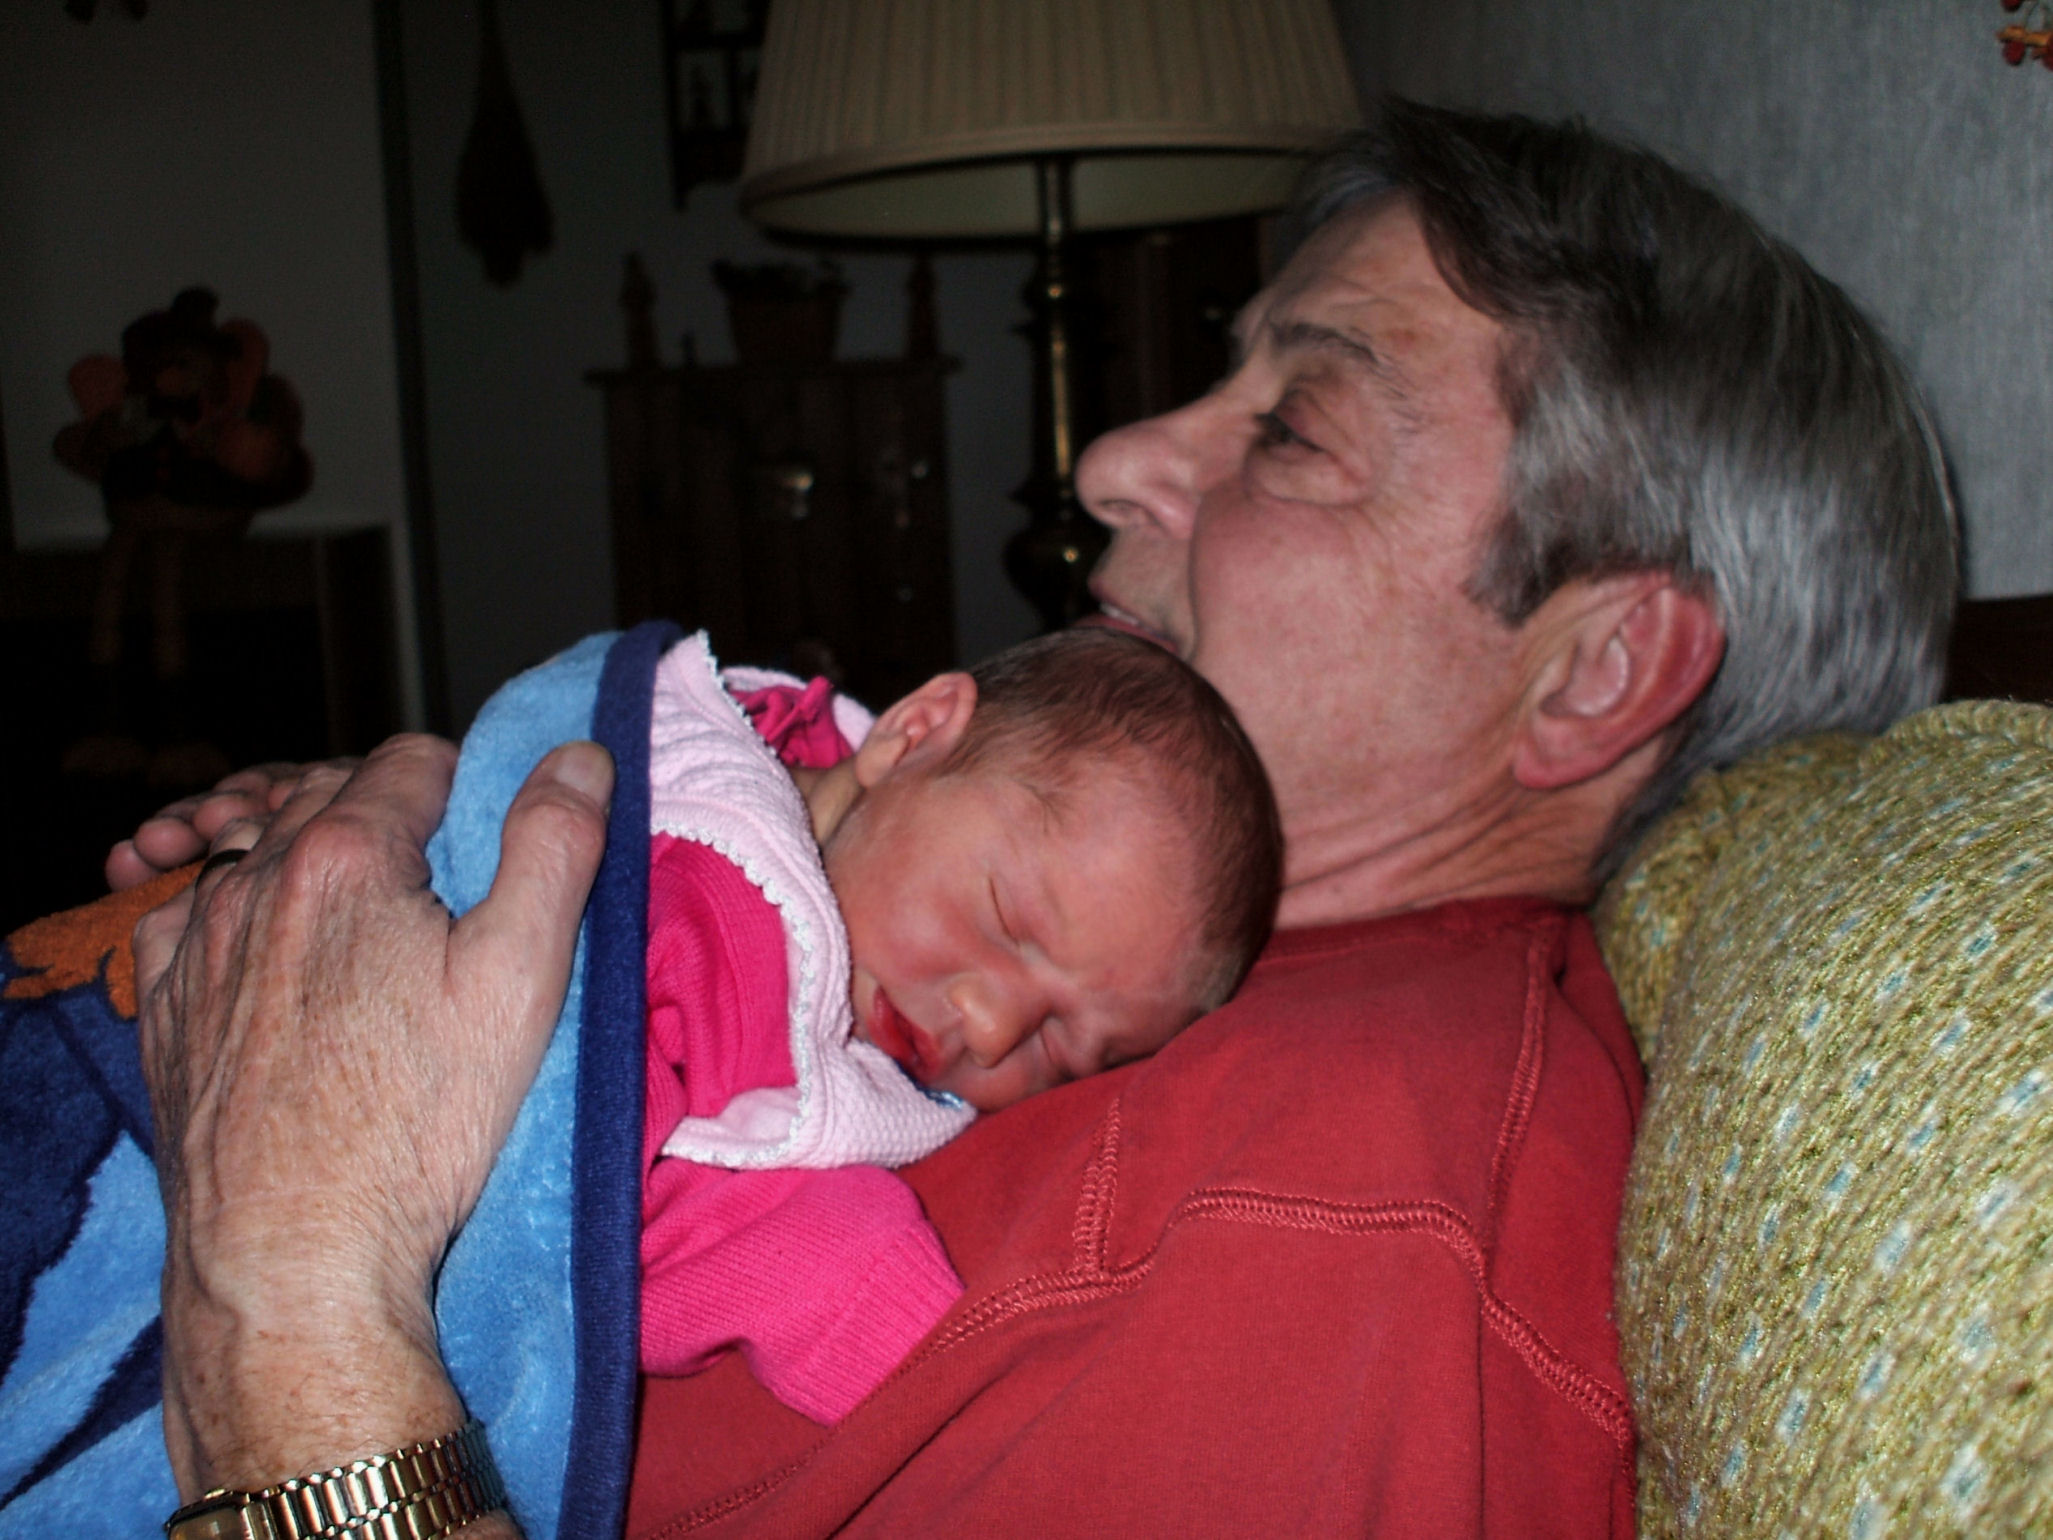 older man with gray hair holds a sleeping baby in his arms